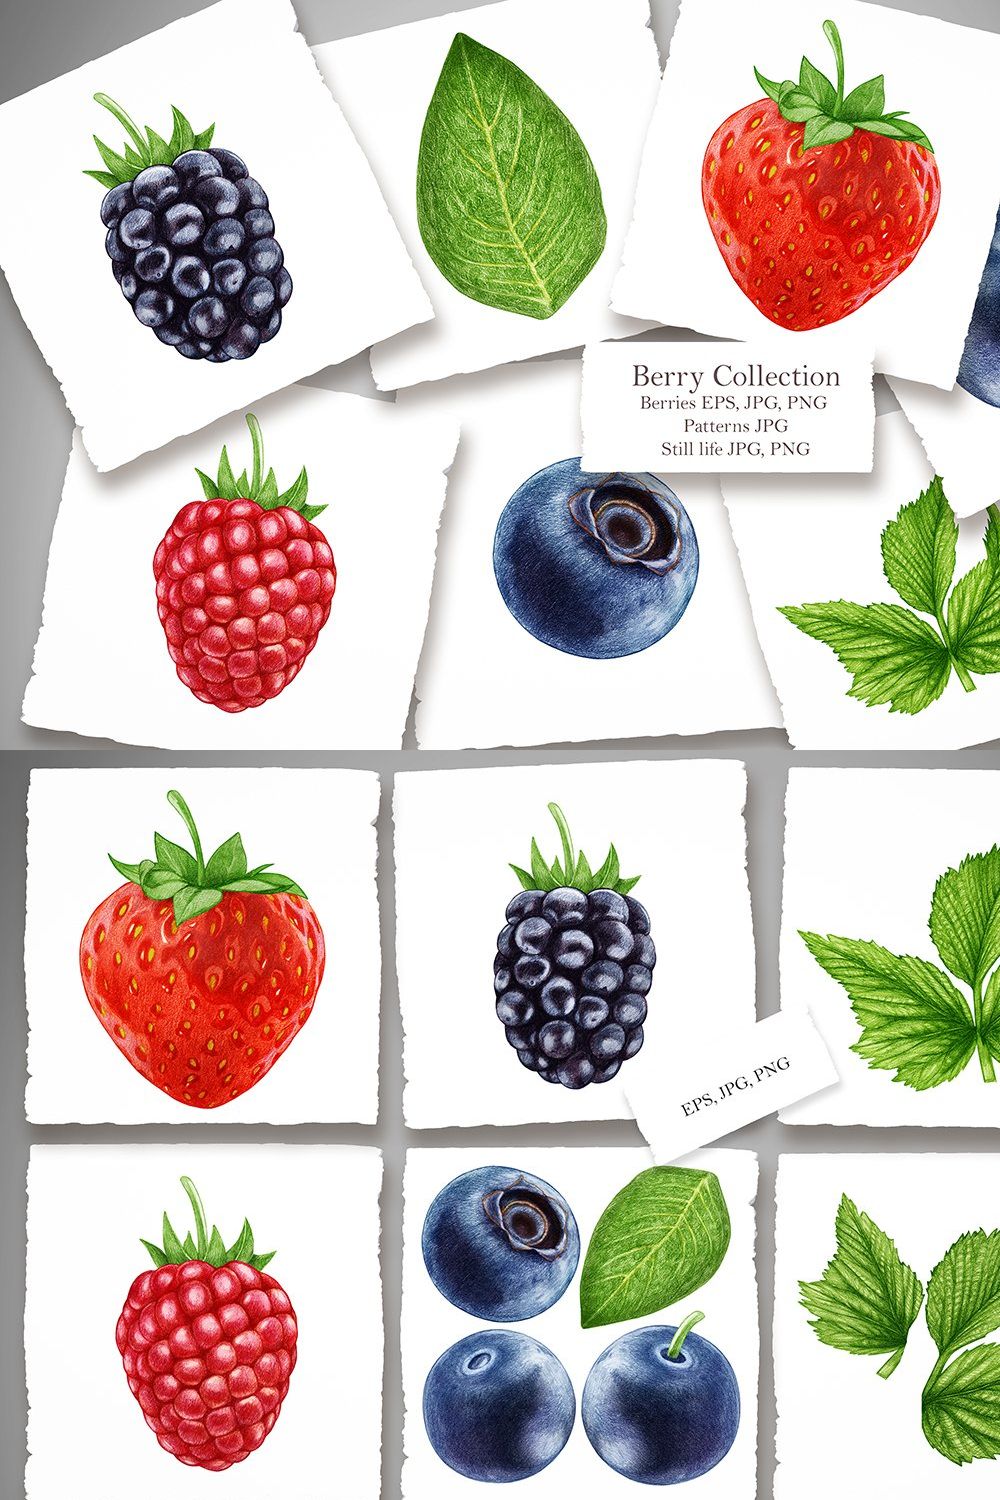 Berry Collection pinterest preview image.